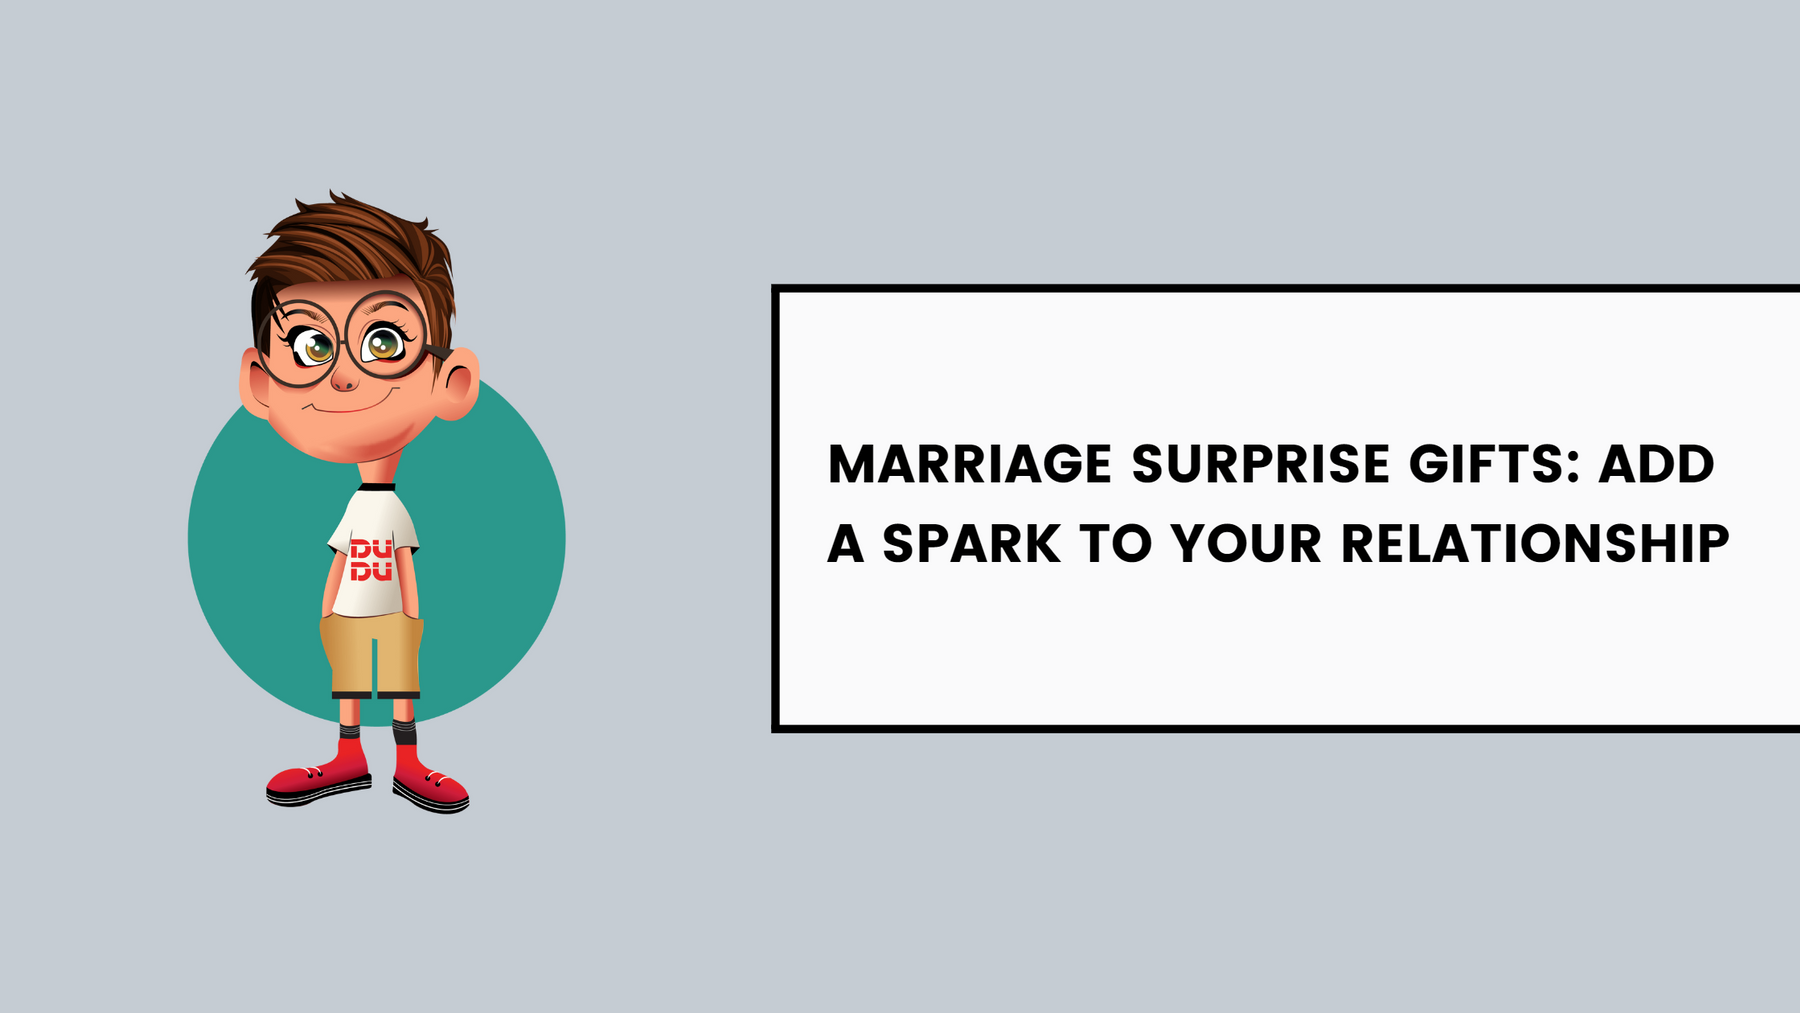 Marriage Surprise Gifts: Add A Spark To Your Relationship